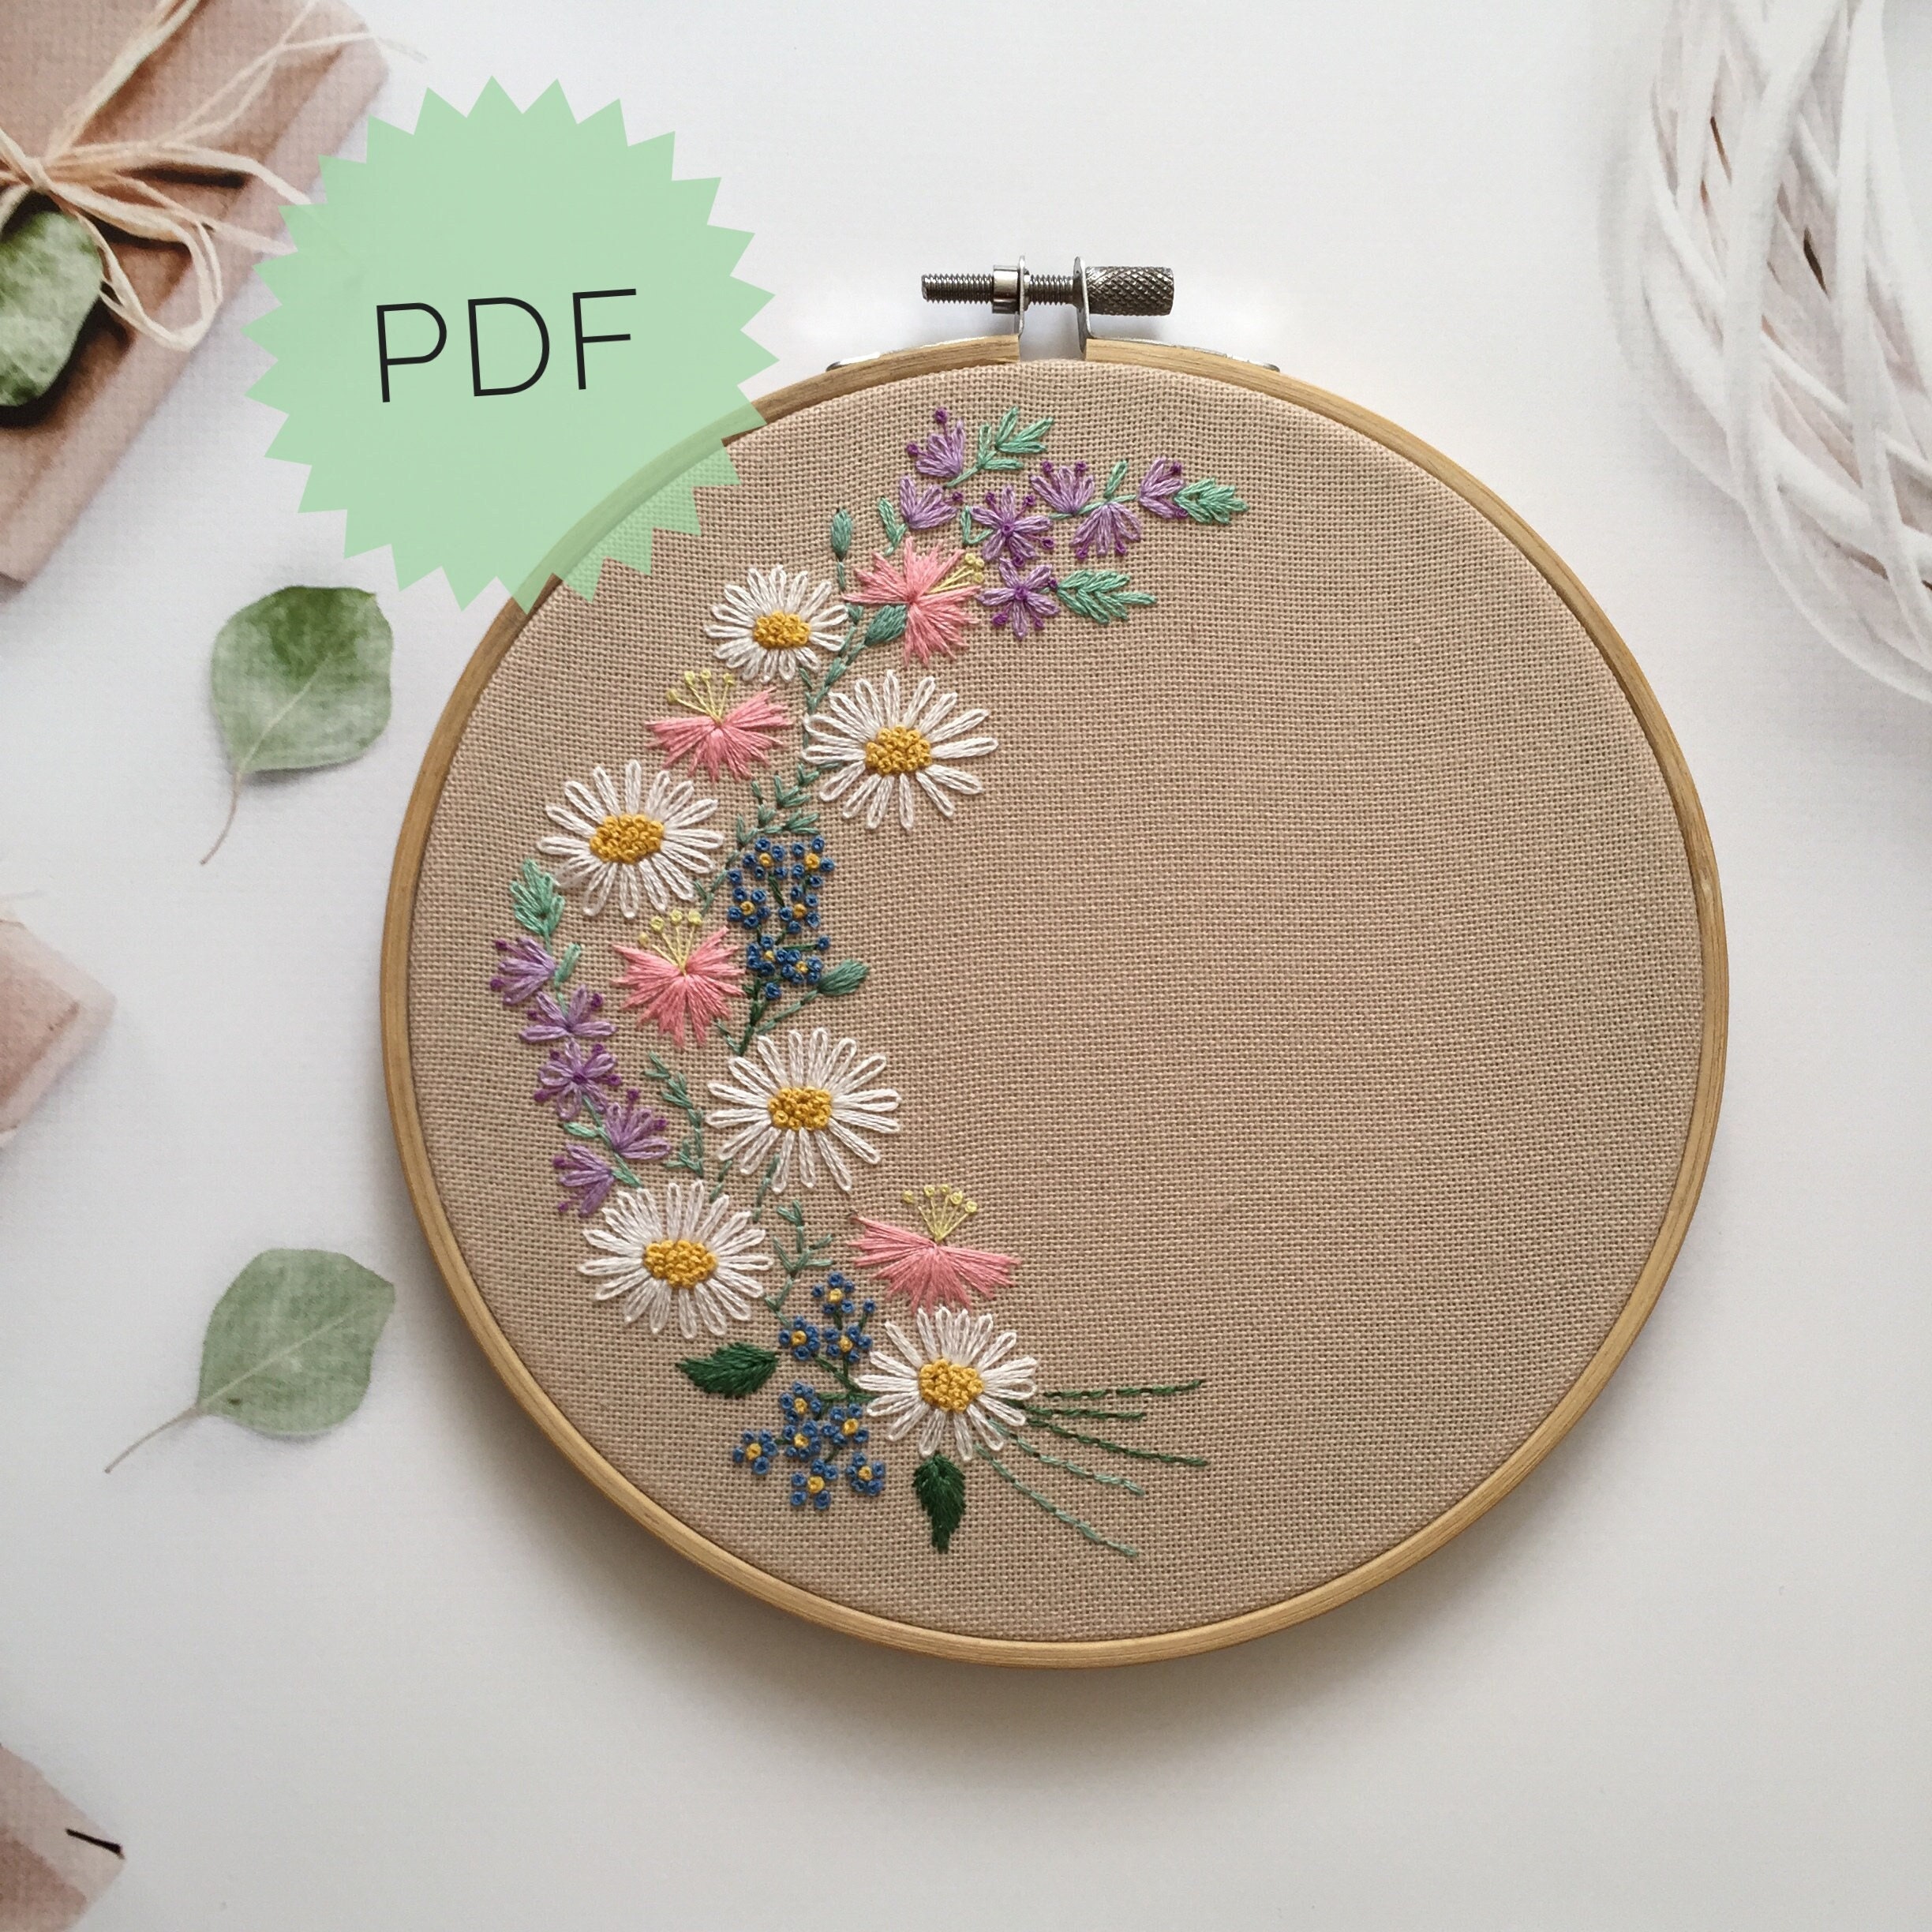 Embroidery Designs with beads  Flower embroidery designs, Hand